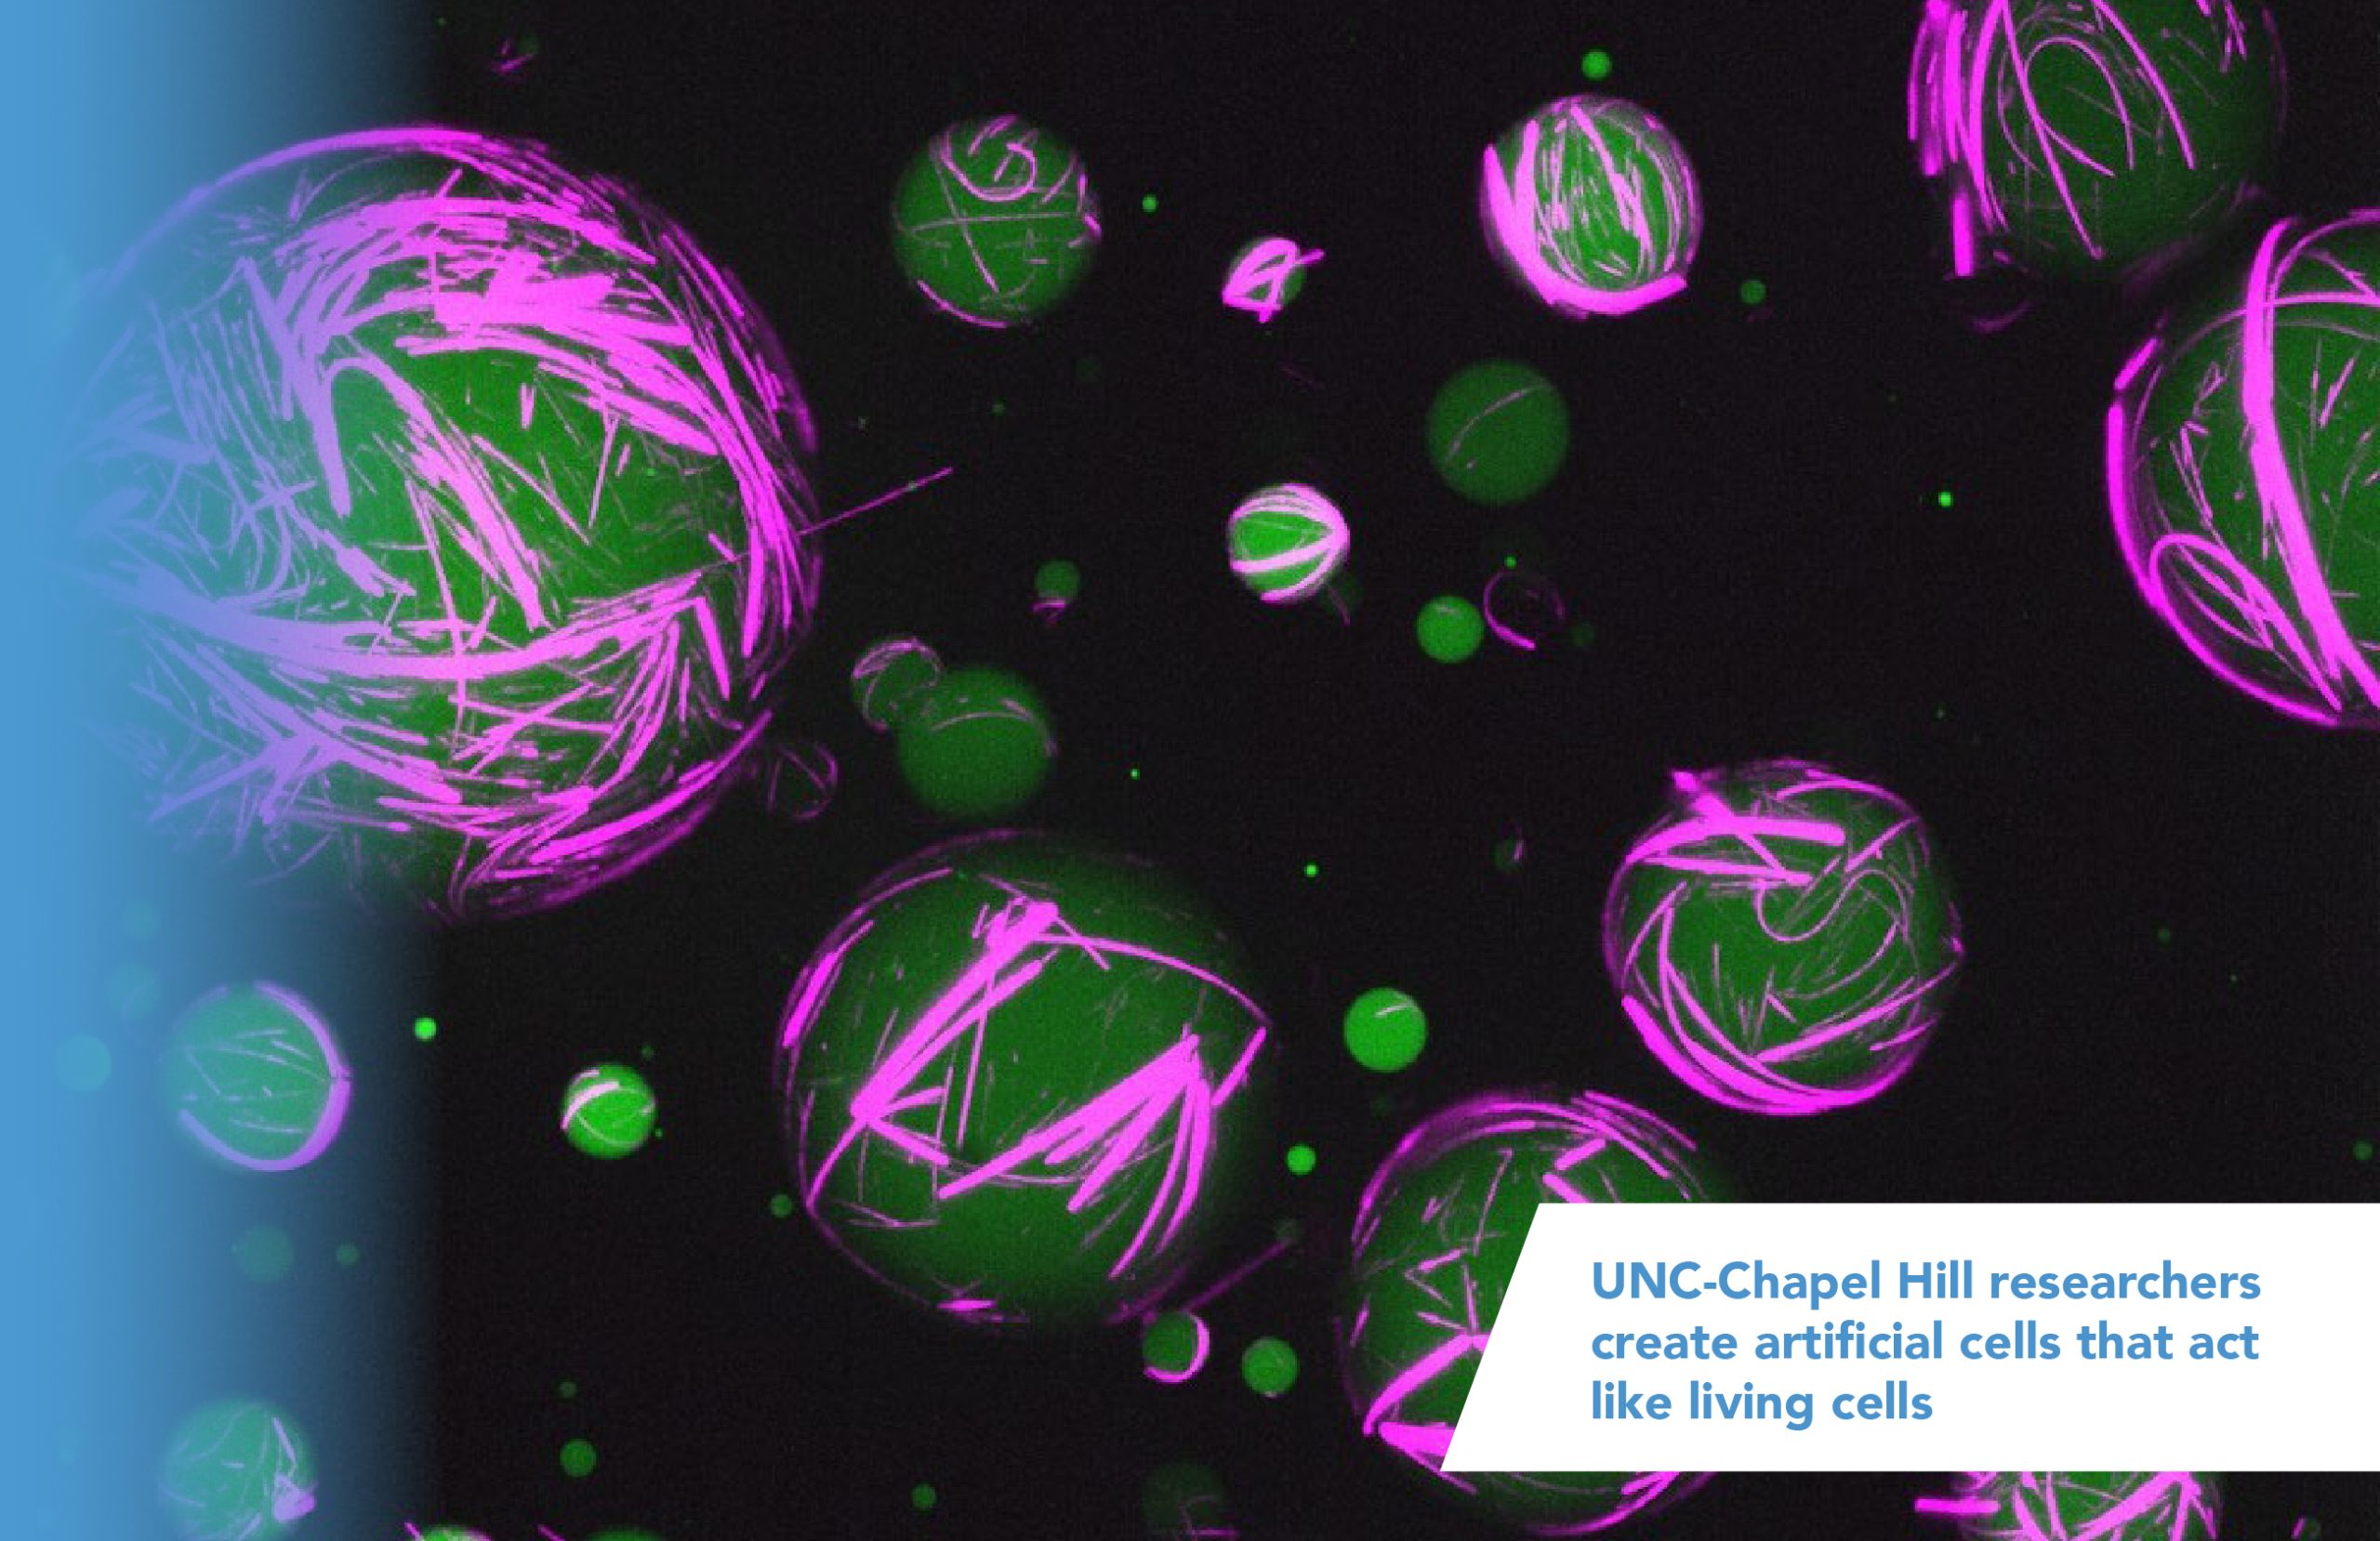 Microscopic photo of artificial cells. They're green, round shapes with purple organic stripes all over them. Photo says 'UNC-Chapel Hill researchers create artificial cells that act like living cells.' Click here to read the story.